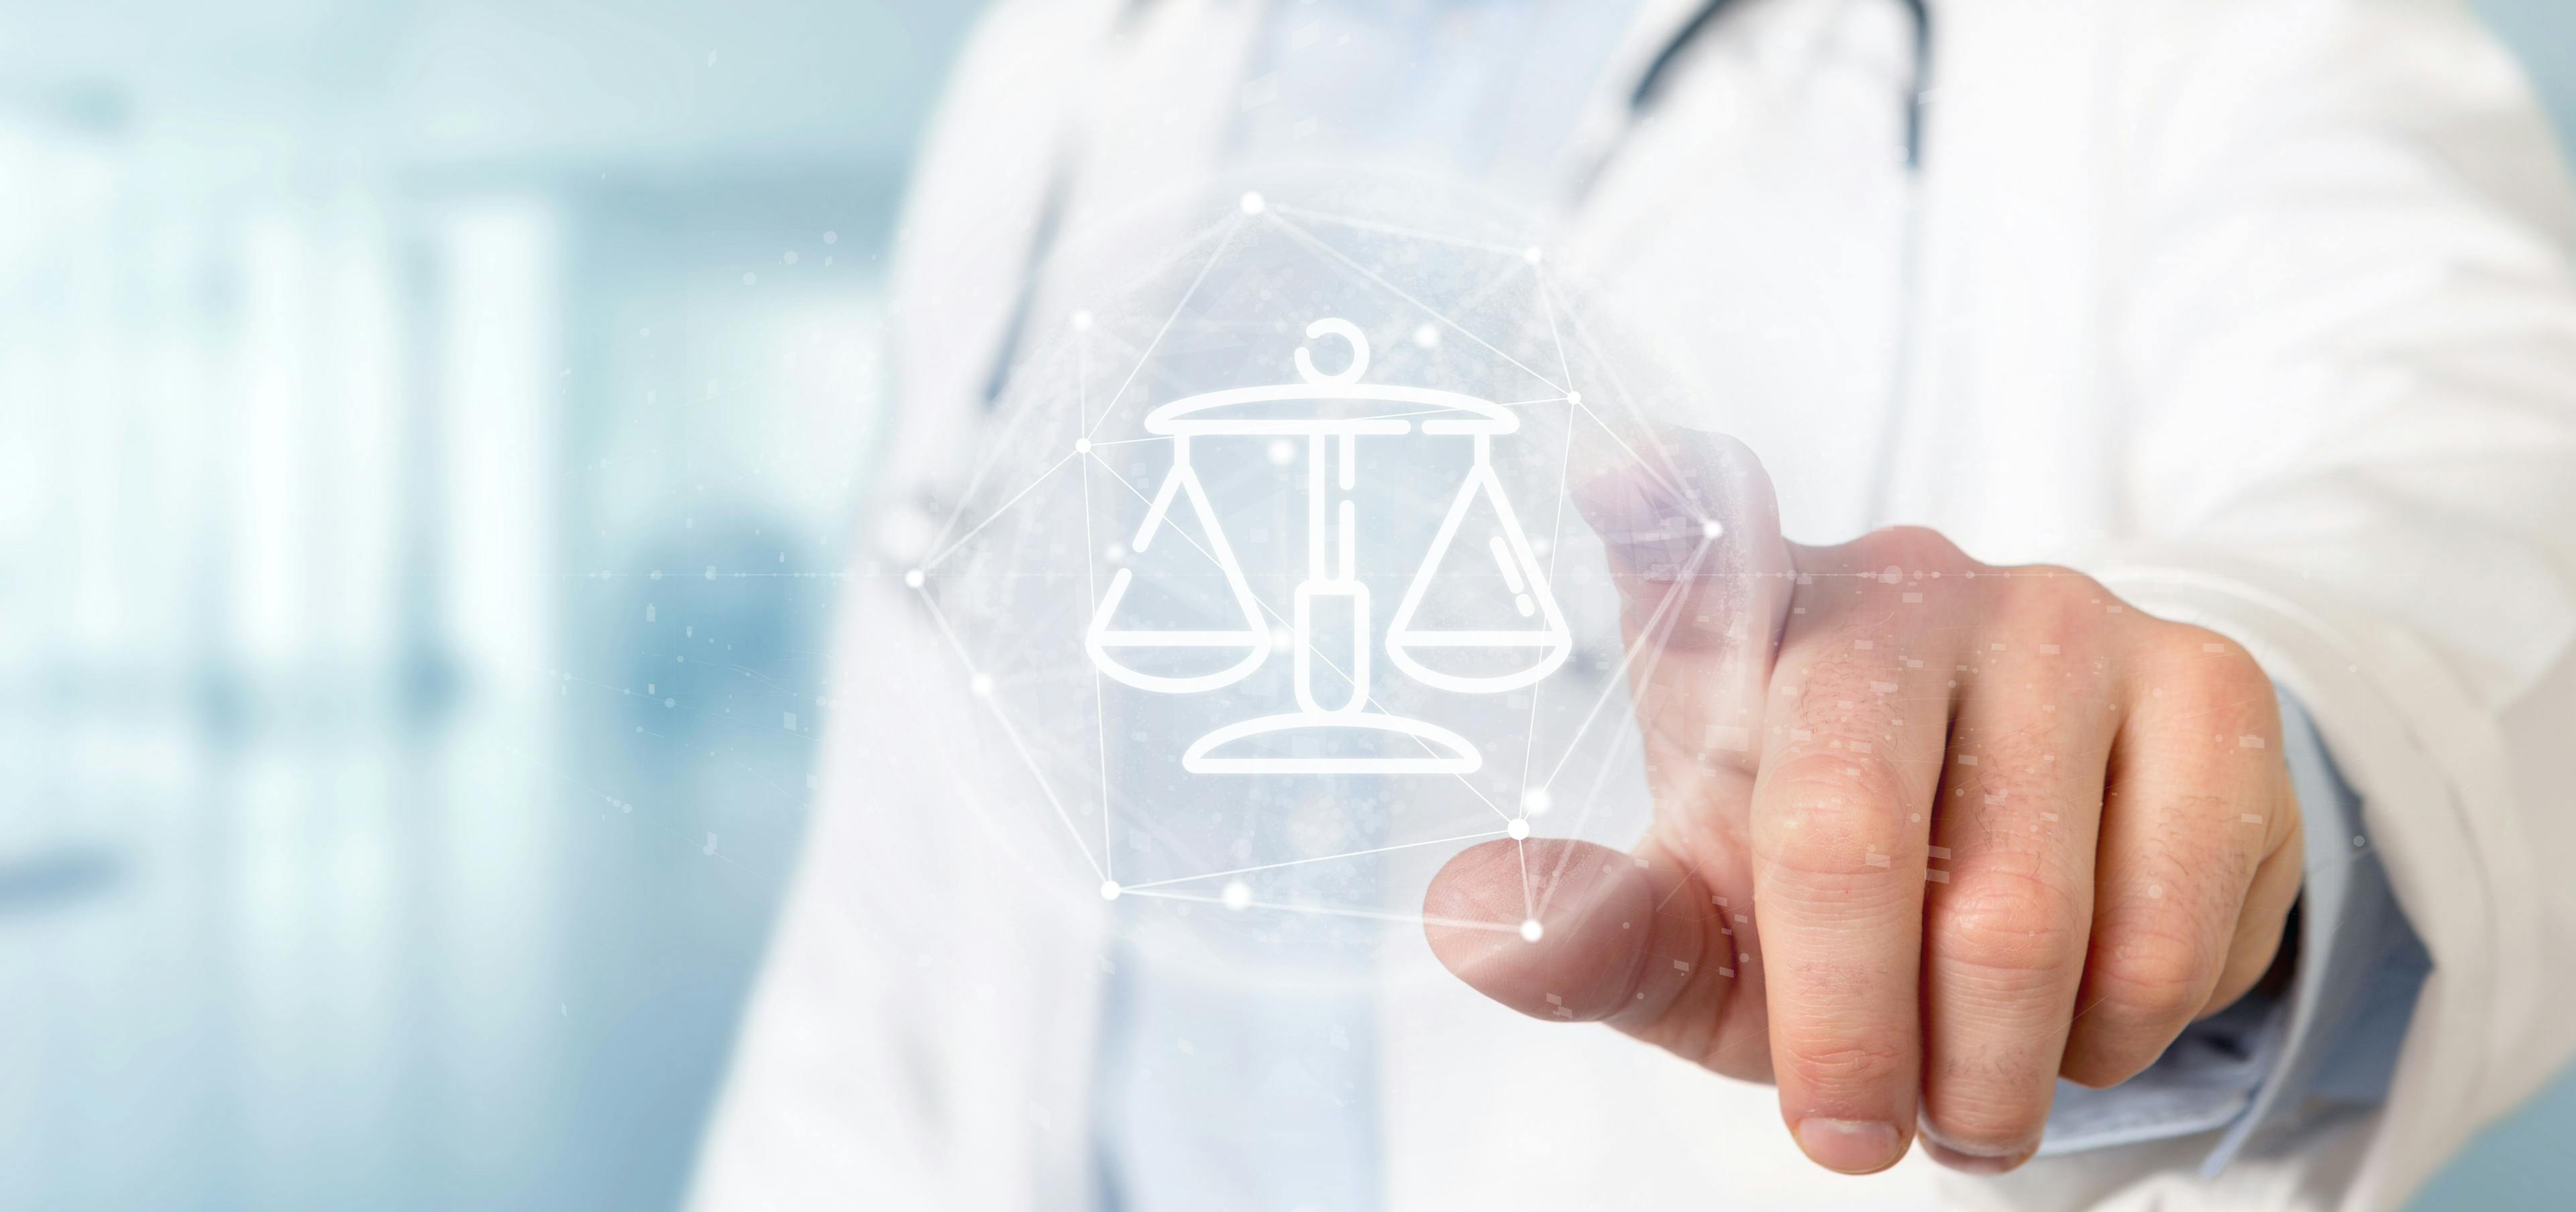 Doctor holding cloud of justice and law icon | Image Credit: © Production Perig - stock.adobe.com